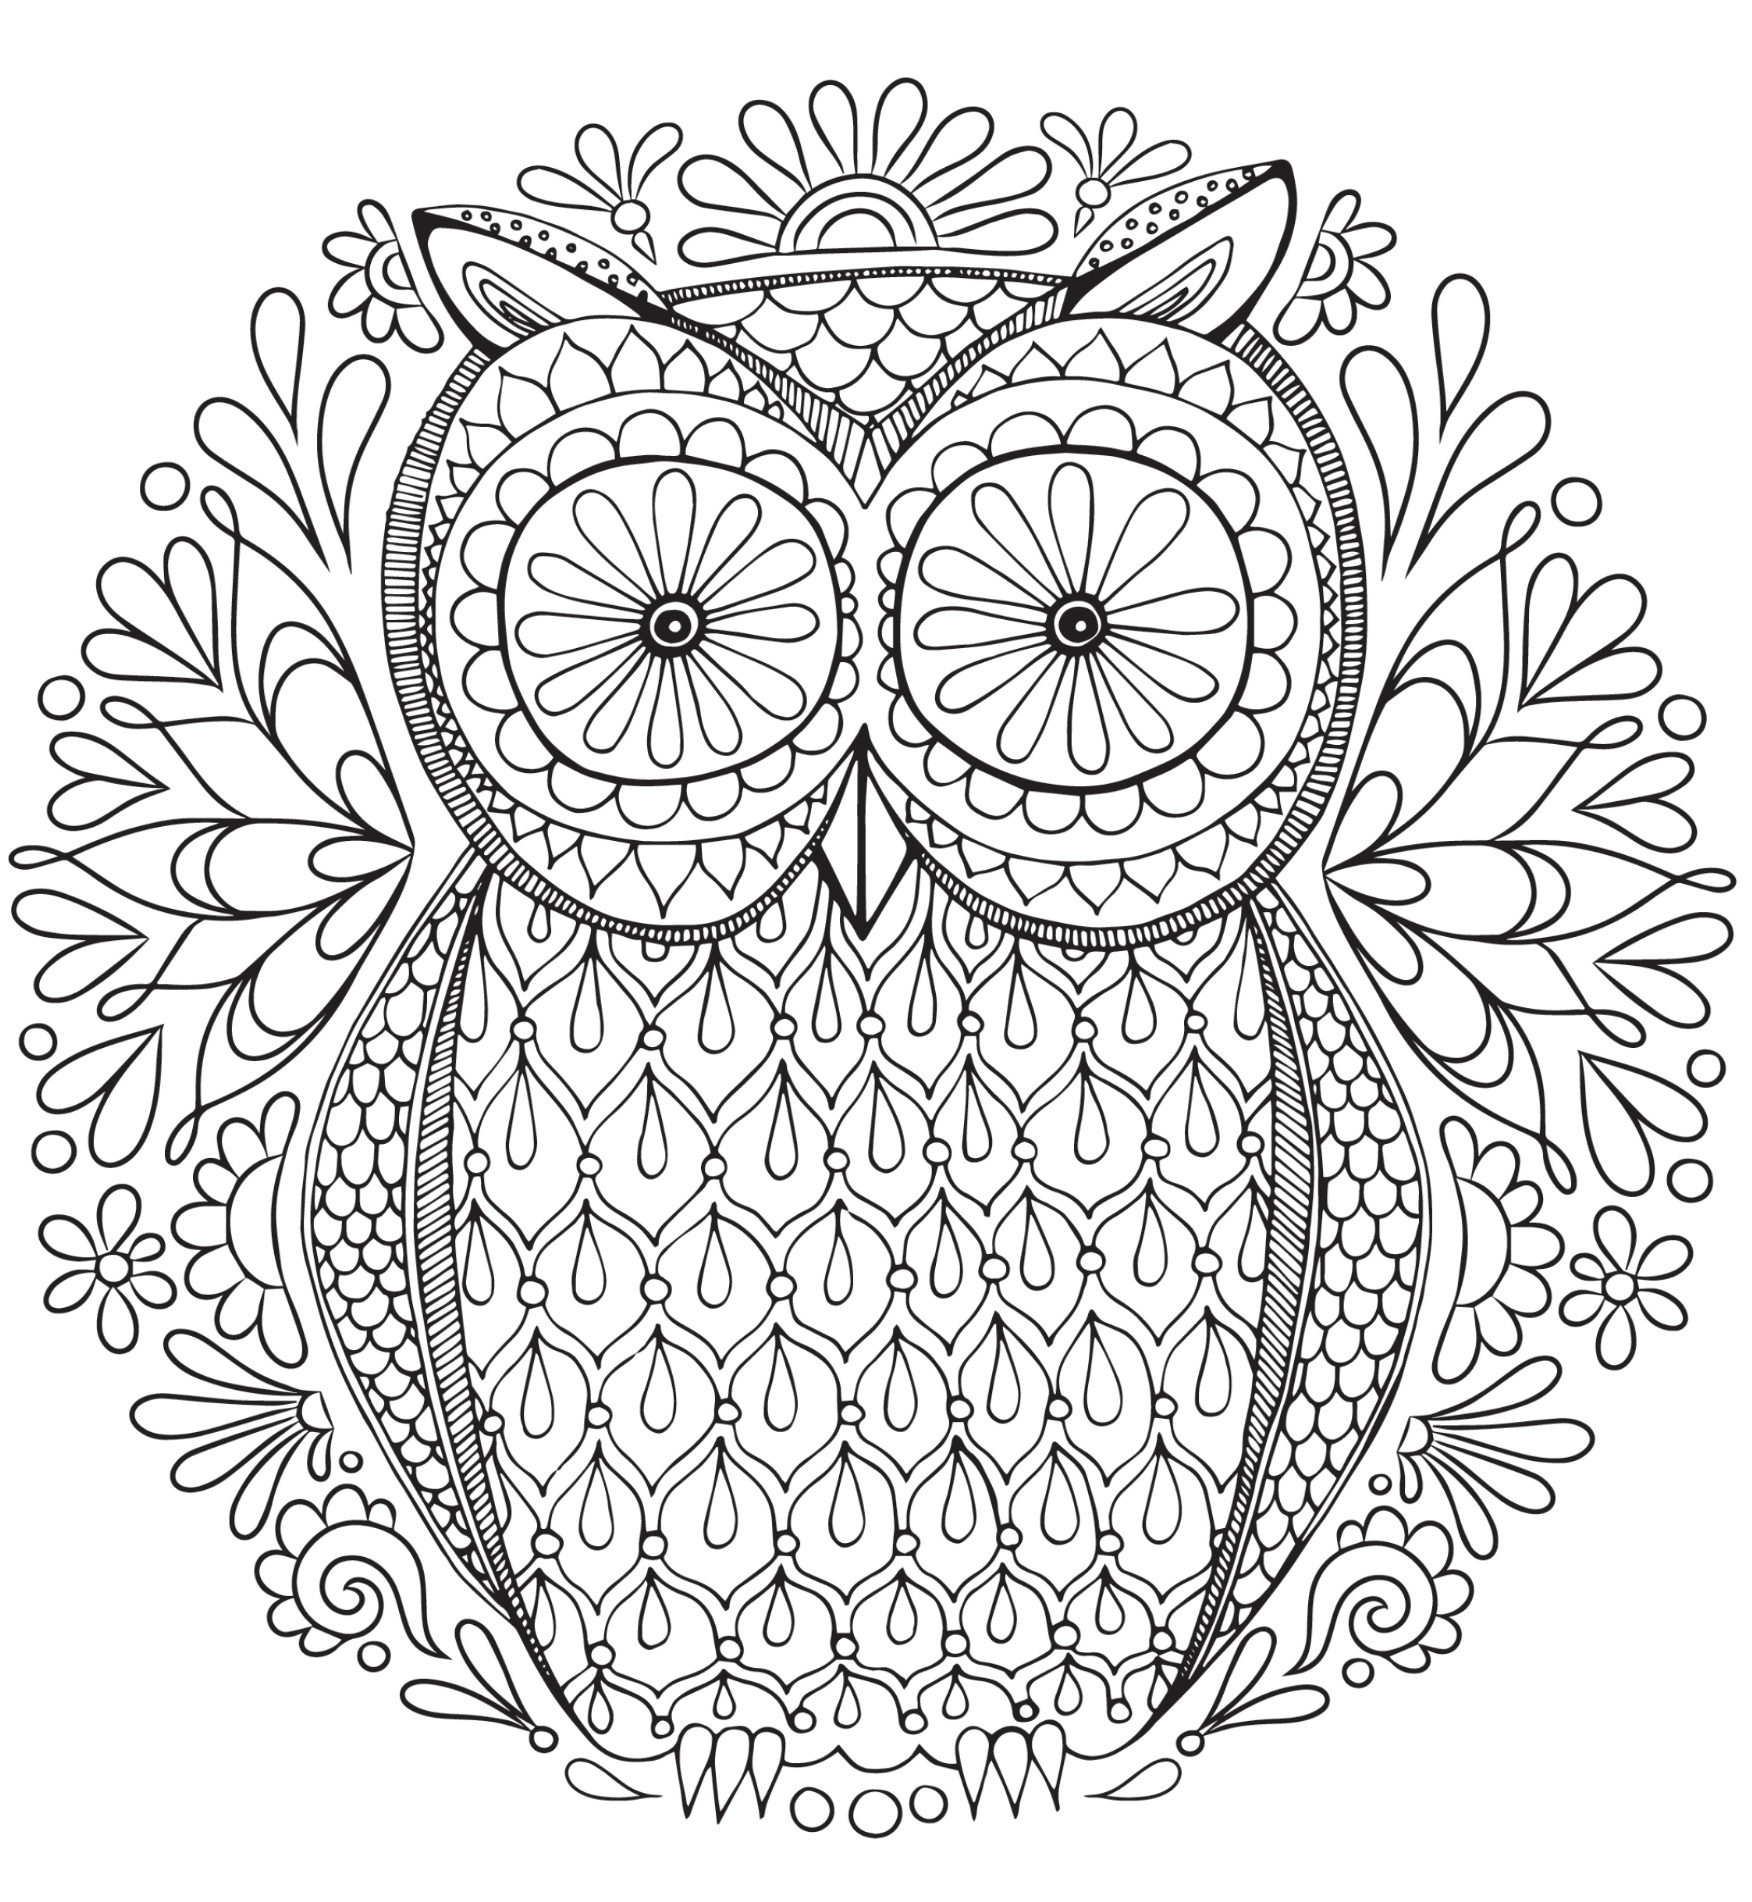 Free Coloring Pages Adult
 20 Free Adult Colouring Pages The Organised Housewife